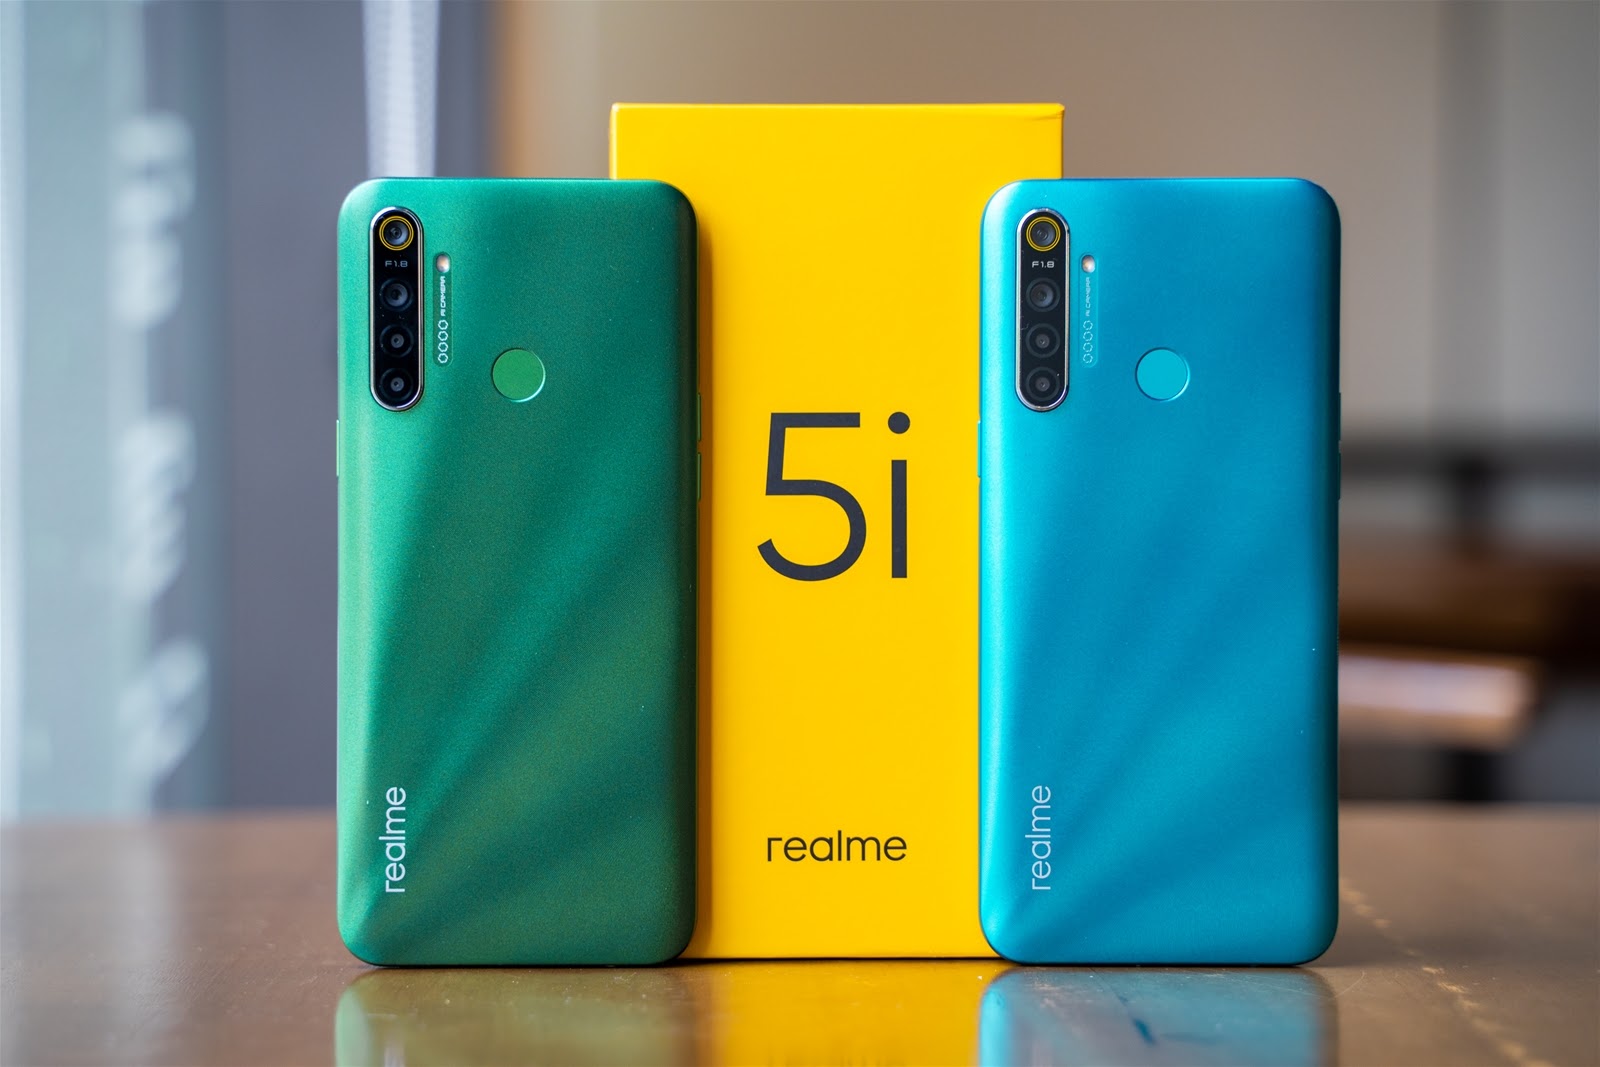 Realme 5i: price and features of new smartphone launched in India